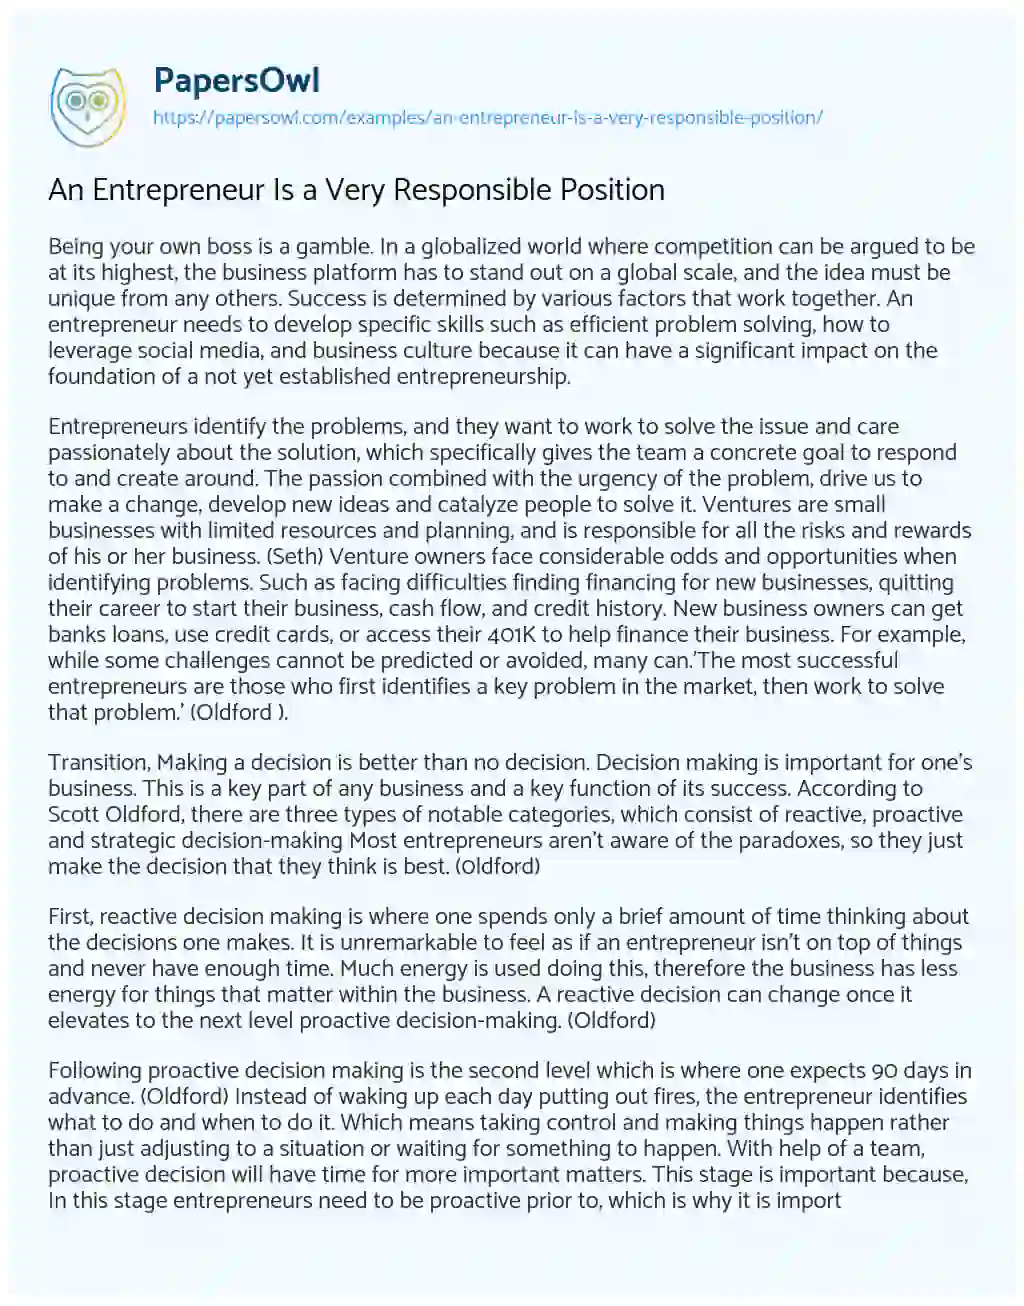 Essay on An Entrepreneur is a very Responsible Position